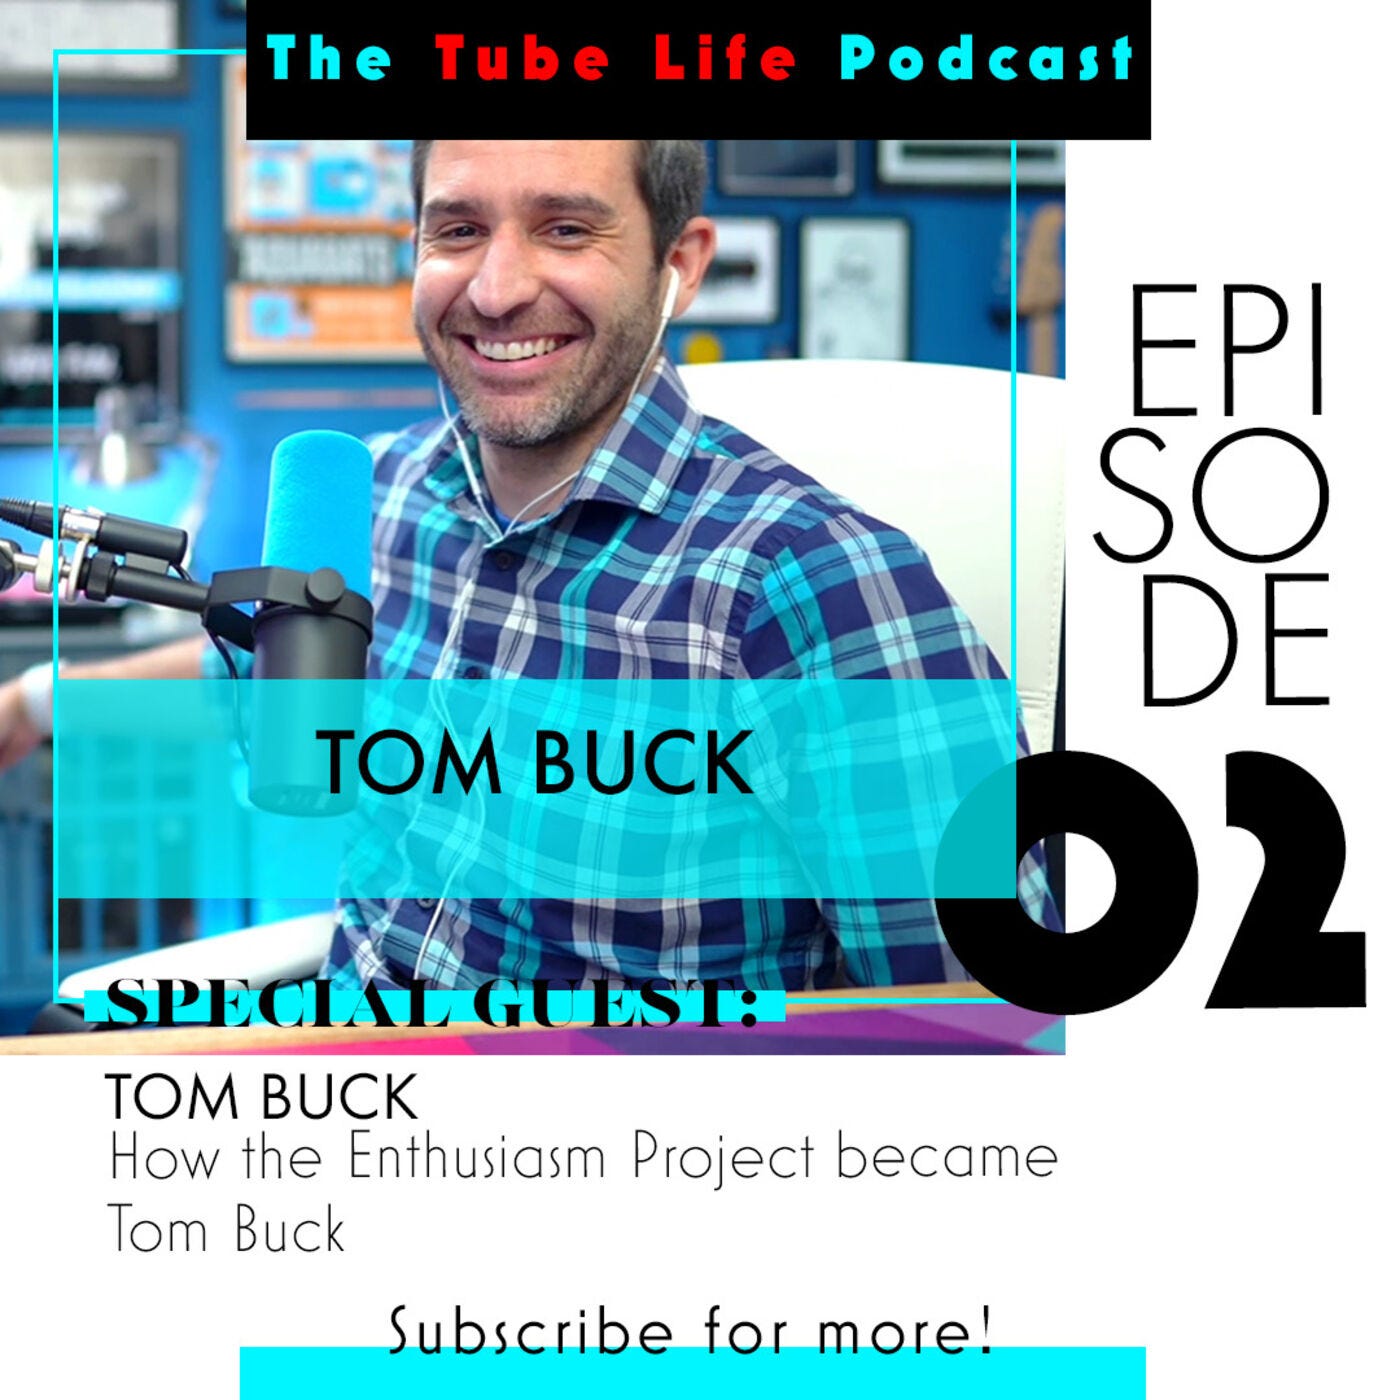 How the Enthusiasm Project became Tom Buck